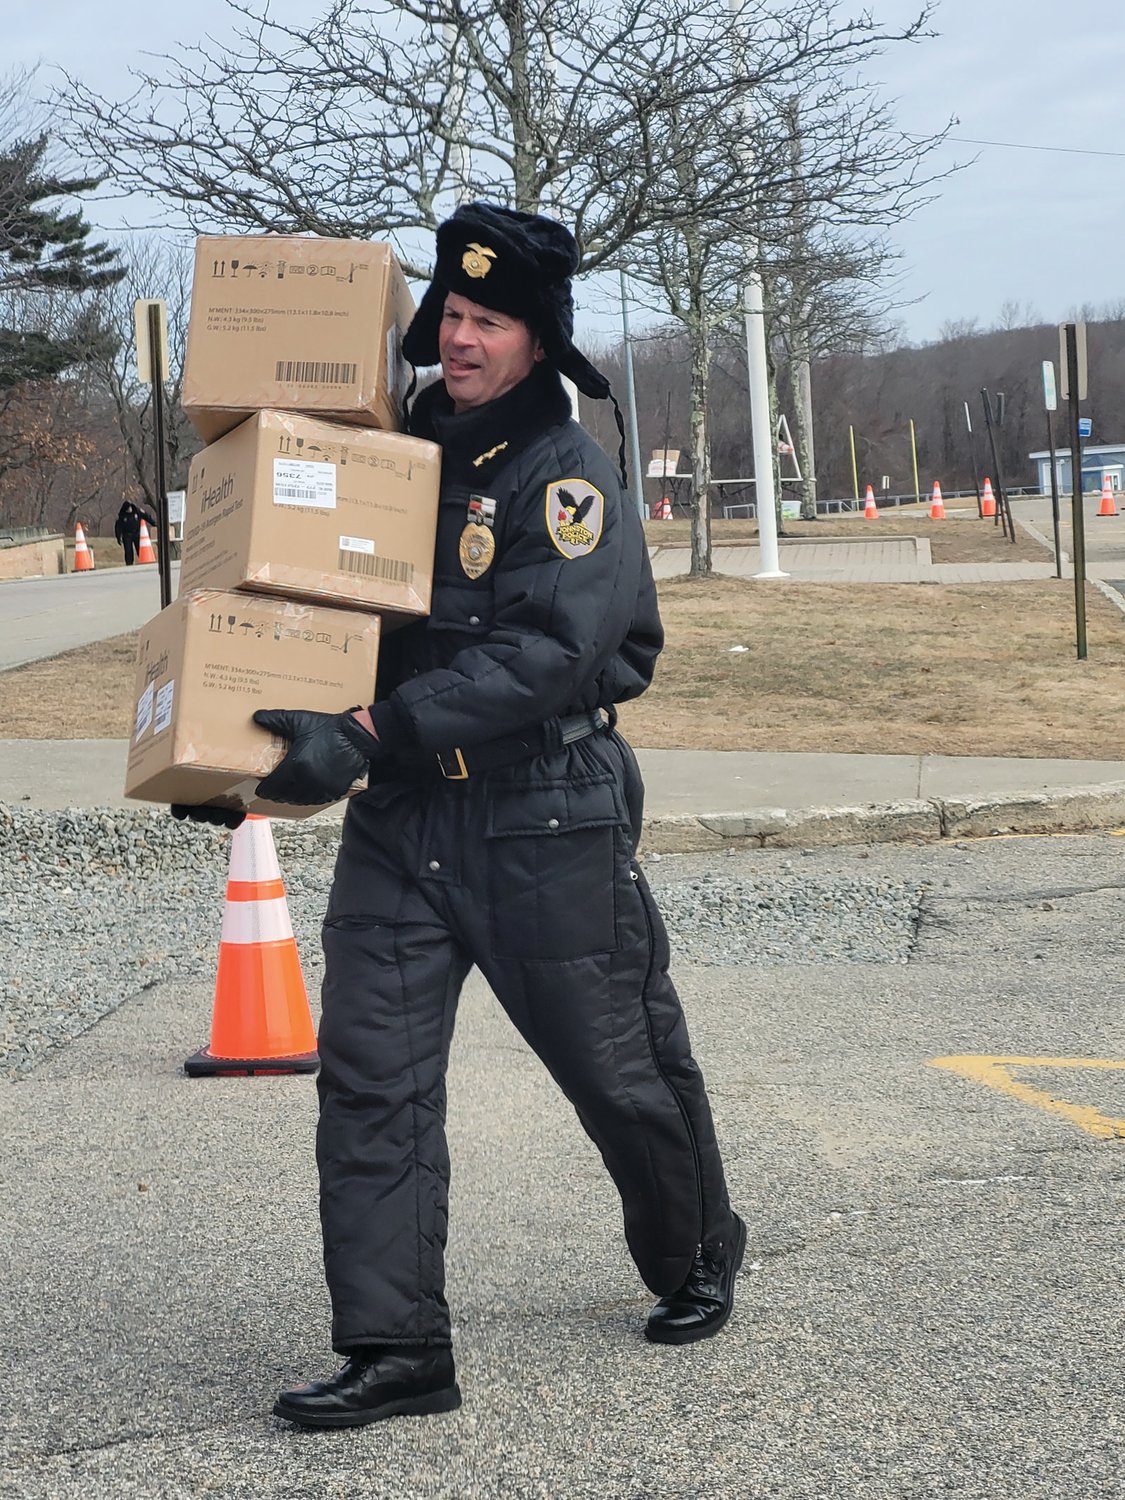 HEAVY LOAD: Johnston Police Chief Joseph P. Razza carries boxes full of take-home Covid testing kits during a drive-through Point of Distribution (POD).